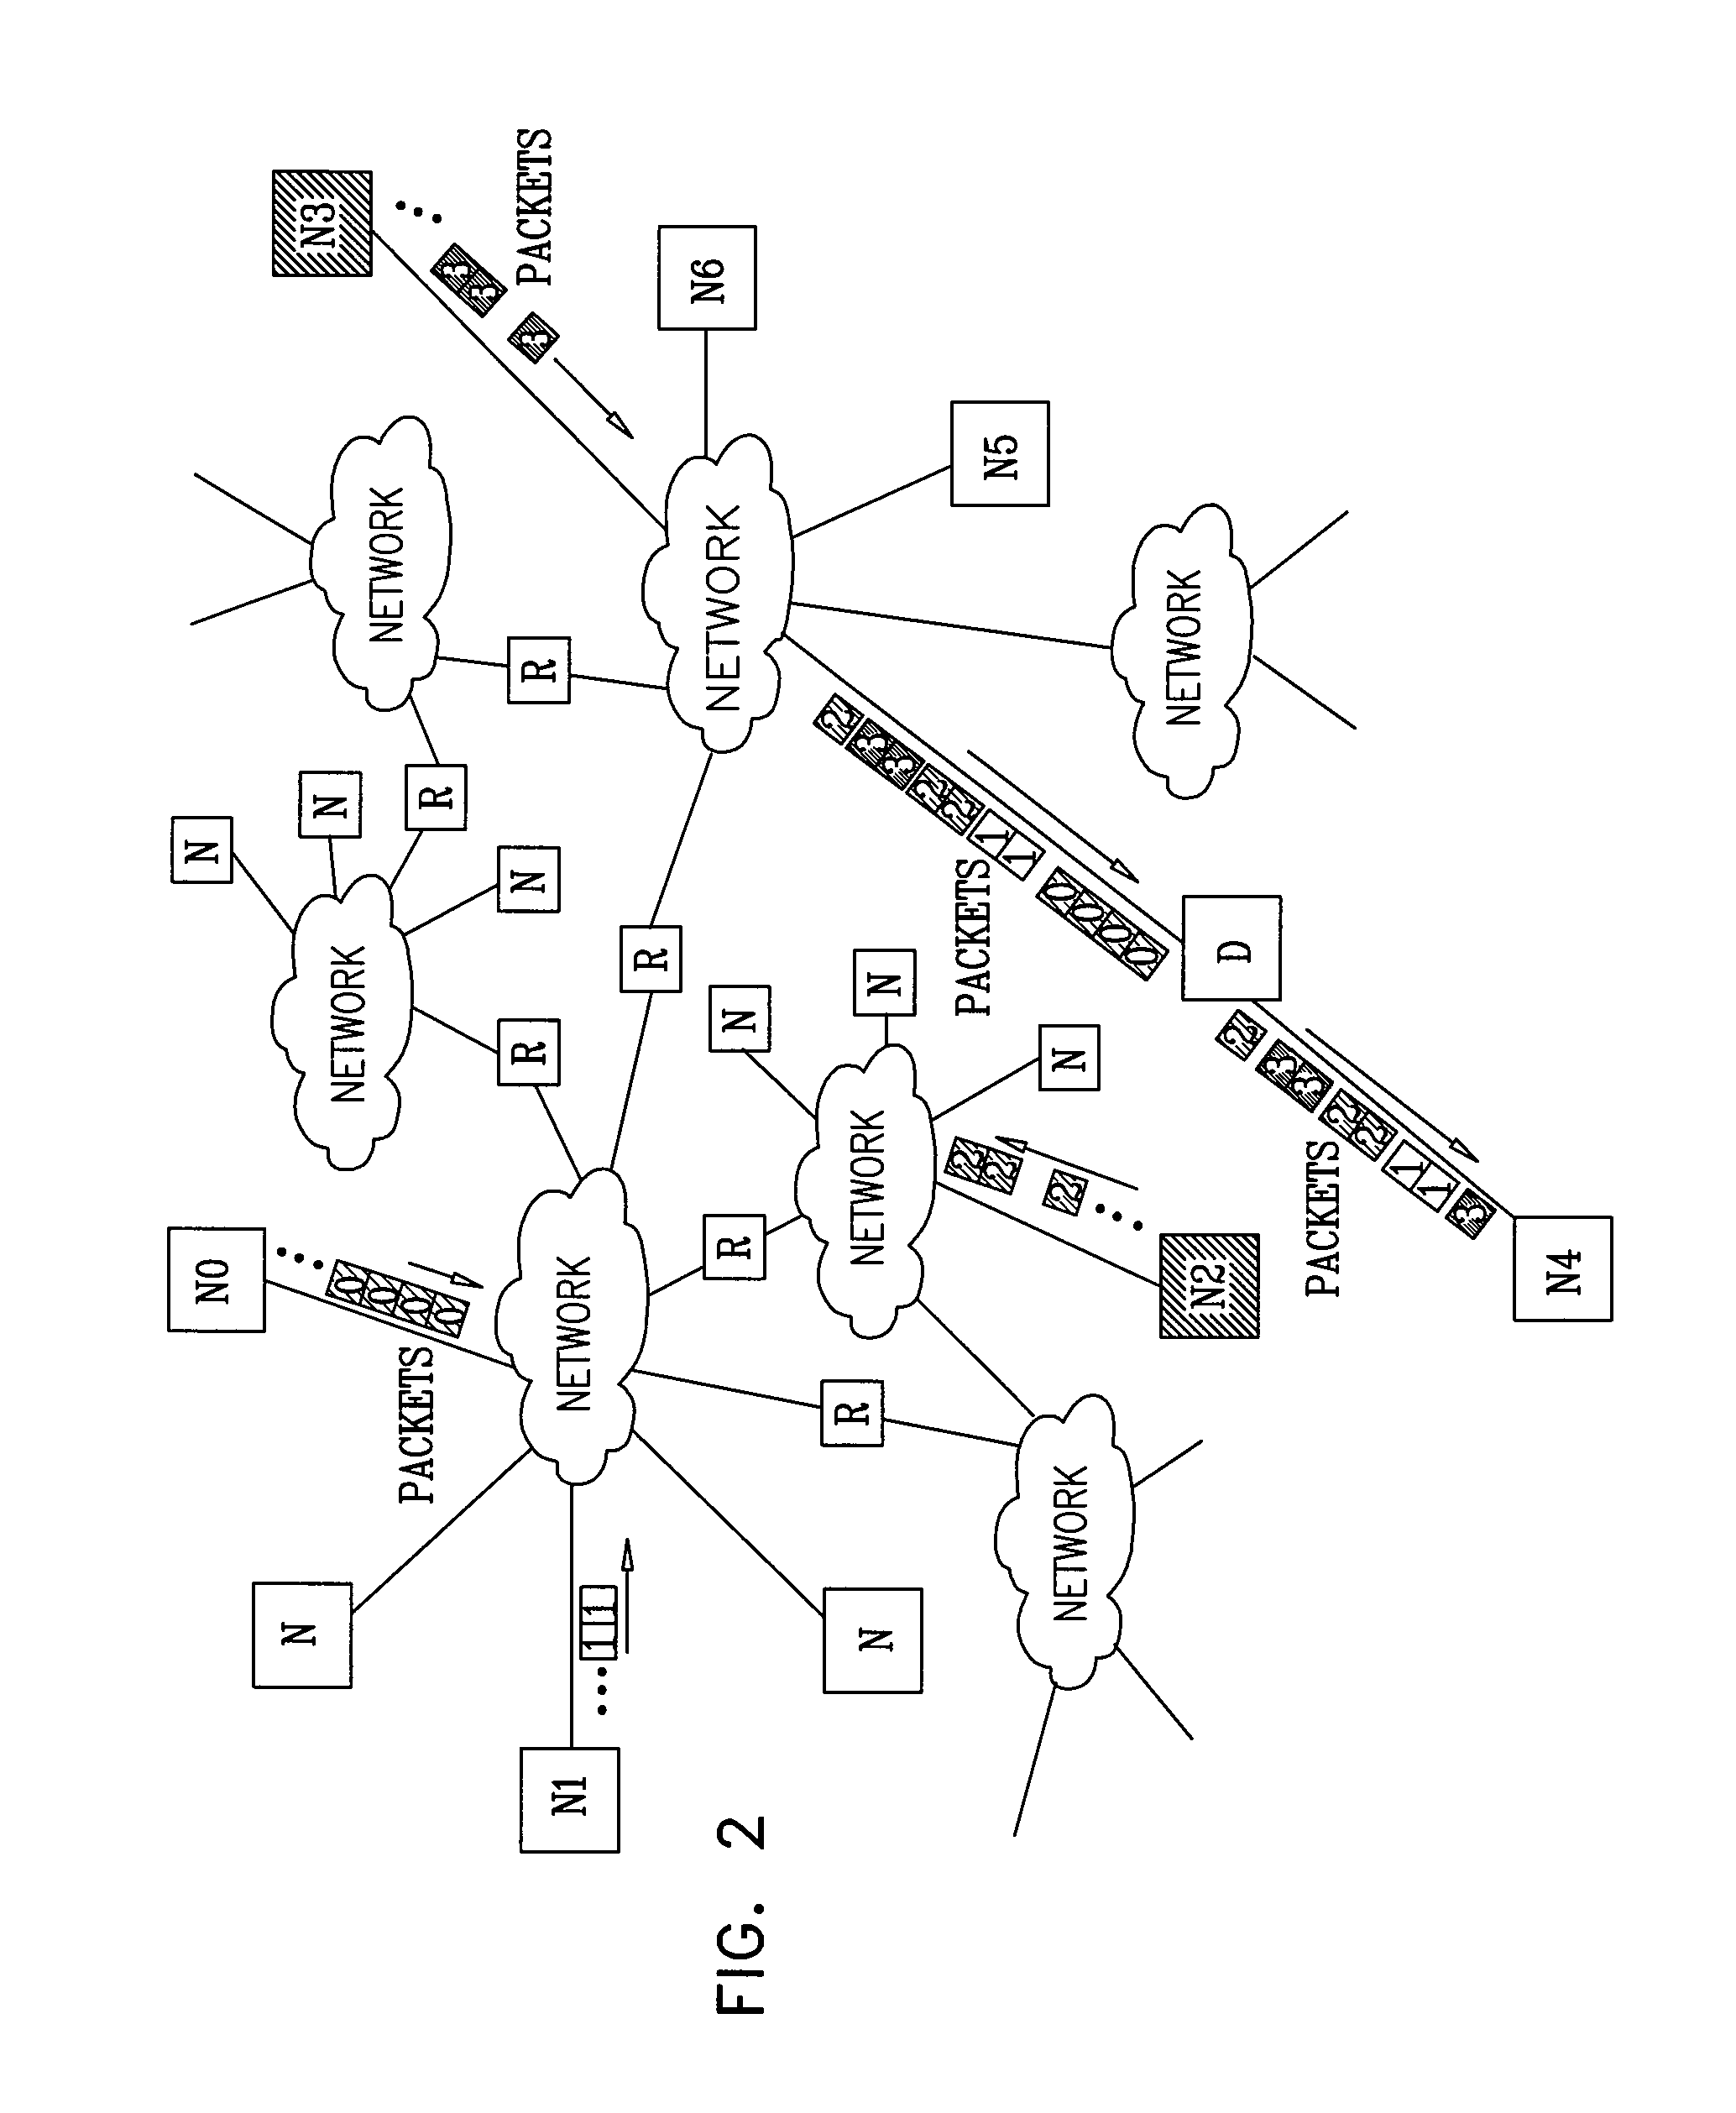 Weighted fair queuing-based methods and apparatus for protecting against overload conditions on nodes of a distributed network